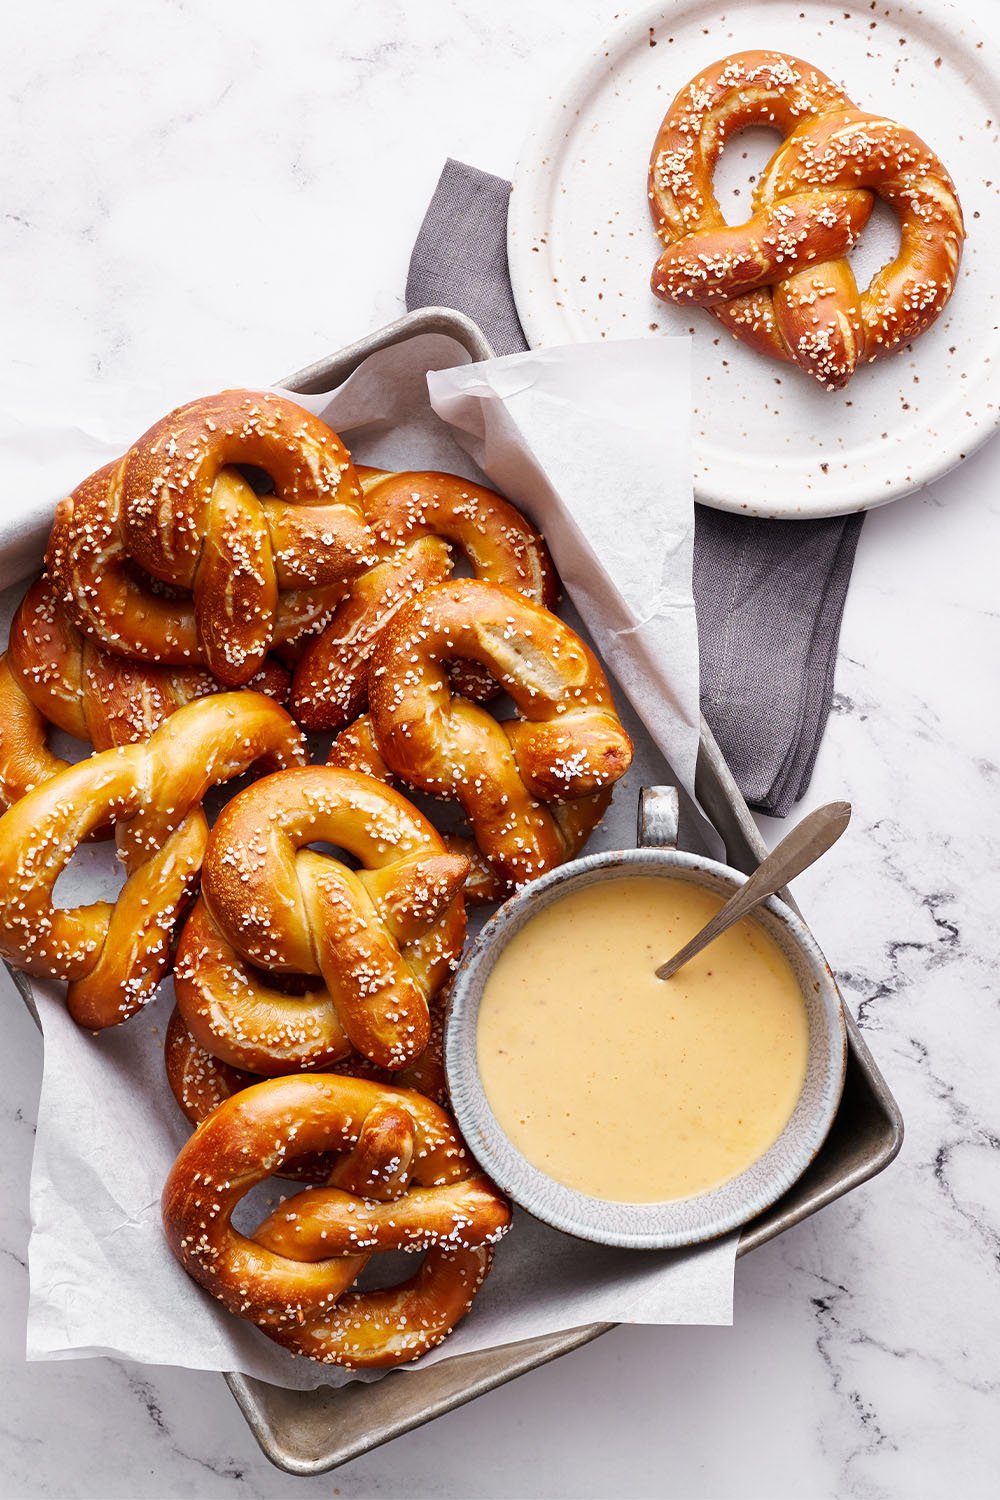 a large platter of homemade pretzels on a tray beside a bowl of beer cheese dip, ready to serve.